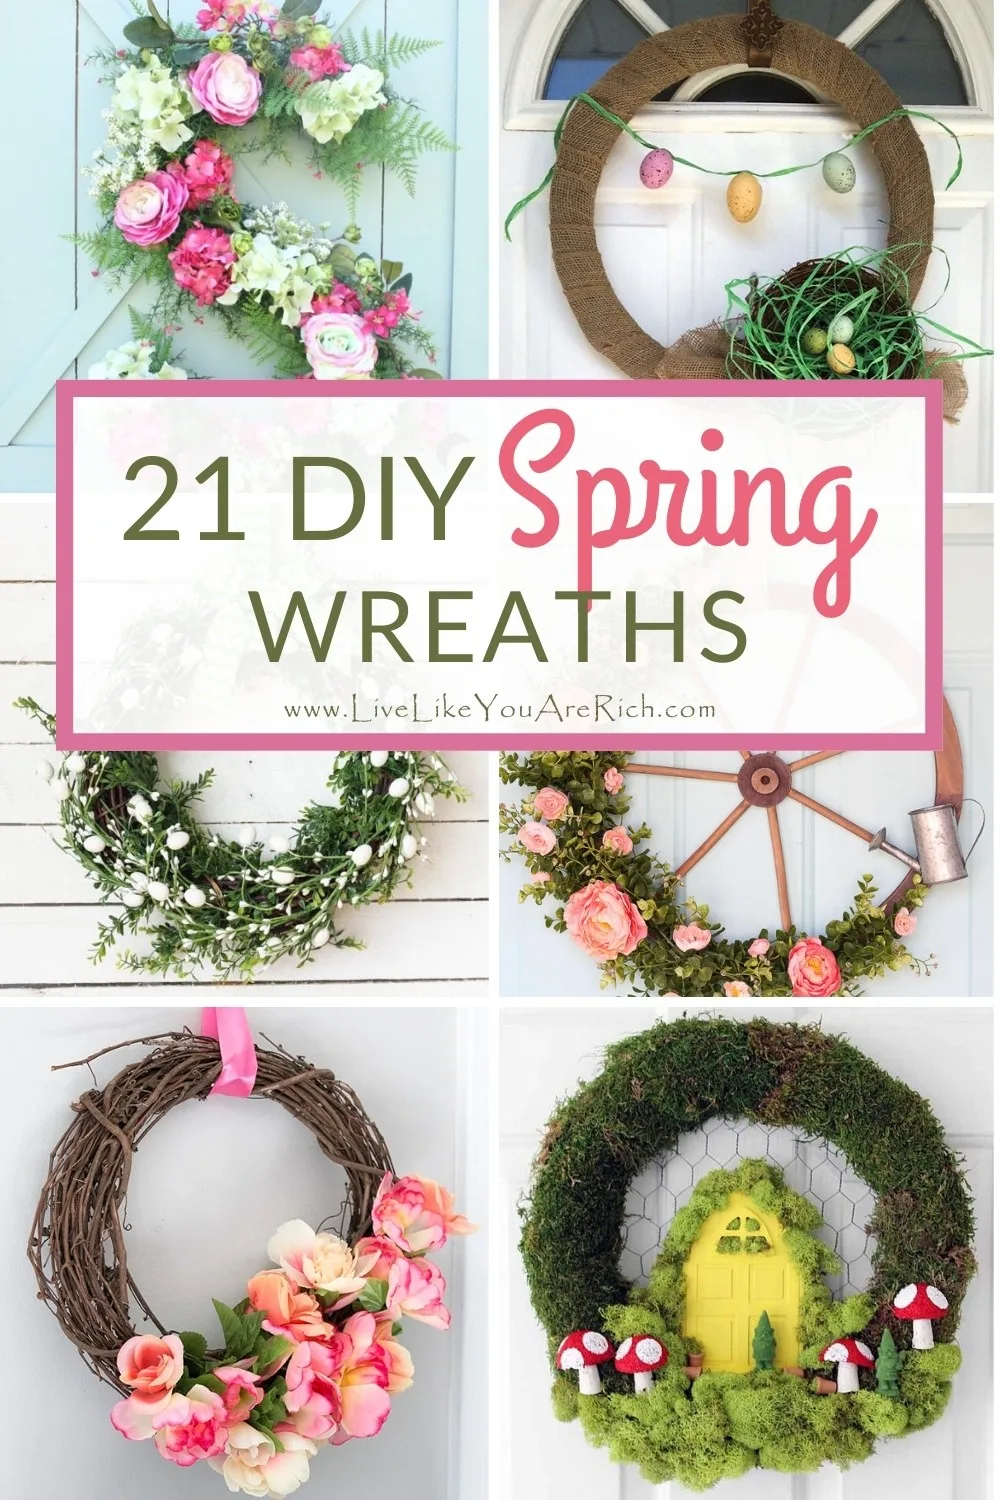 I love Spring! Spring is finally here and I couldn’t be more excited. Here are 21 easy Spring wreath ideas you can make to add instant charm to your home.